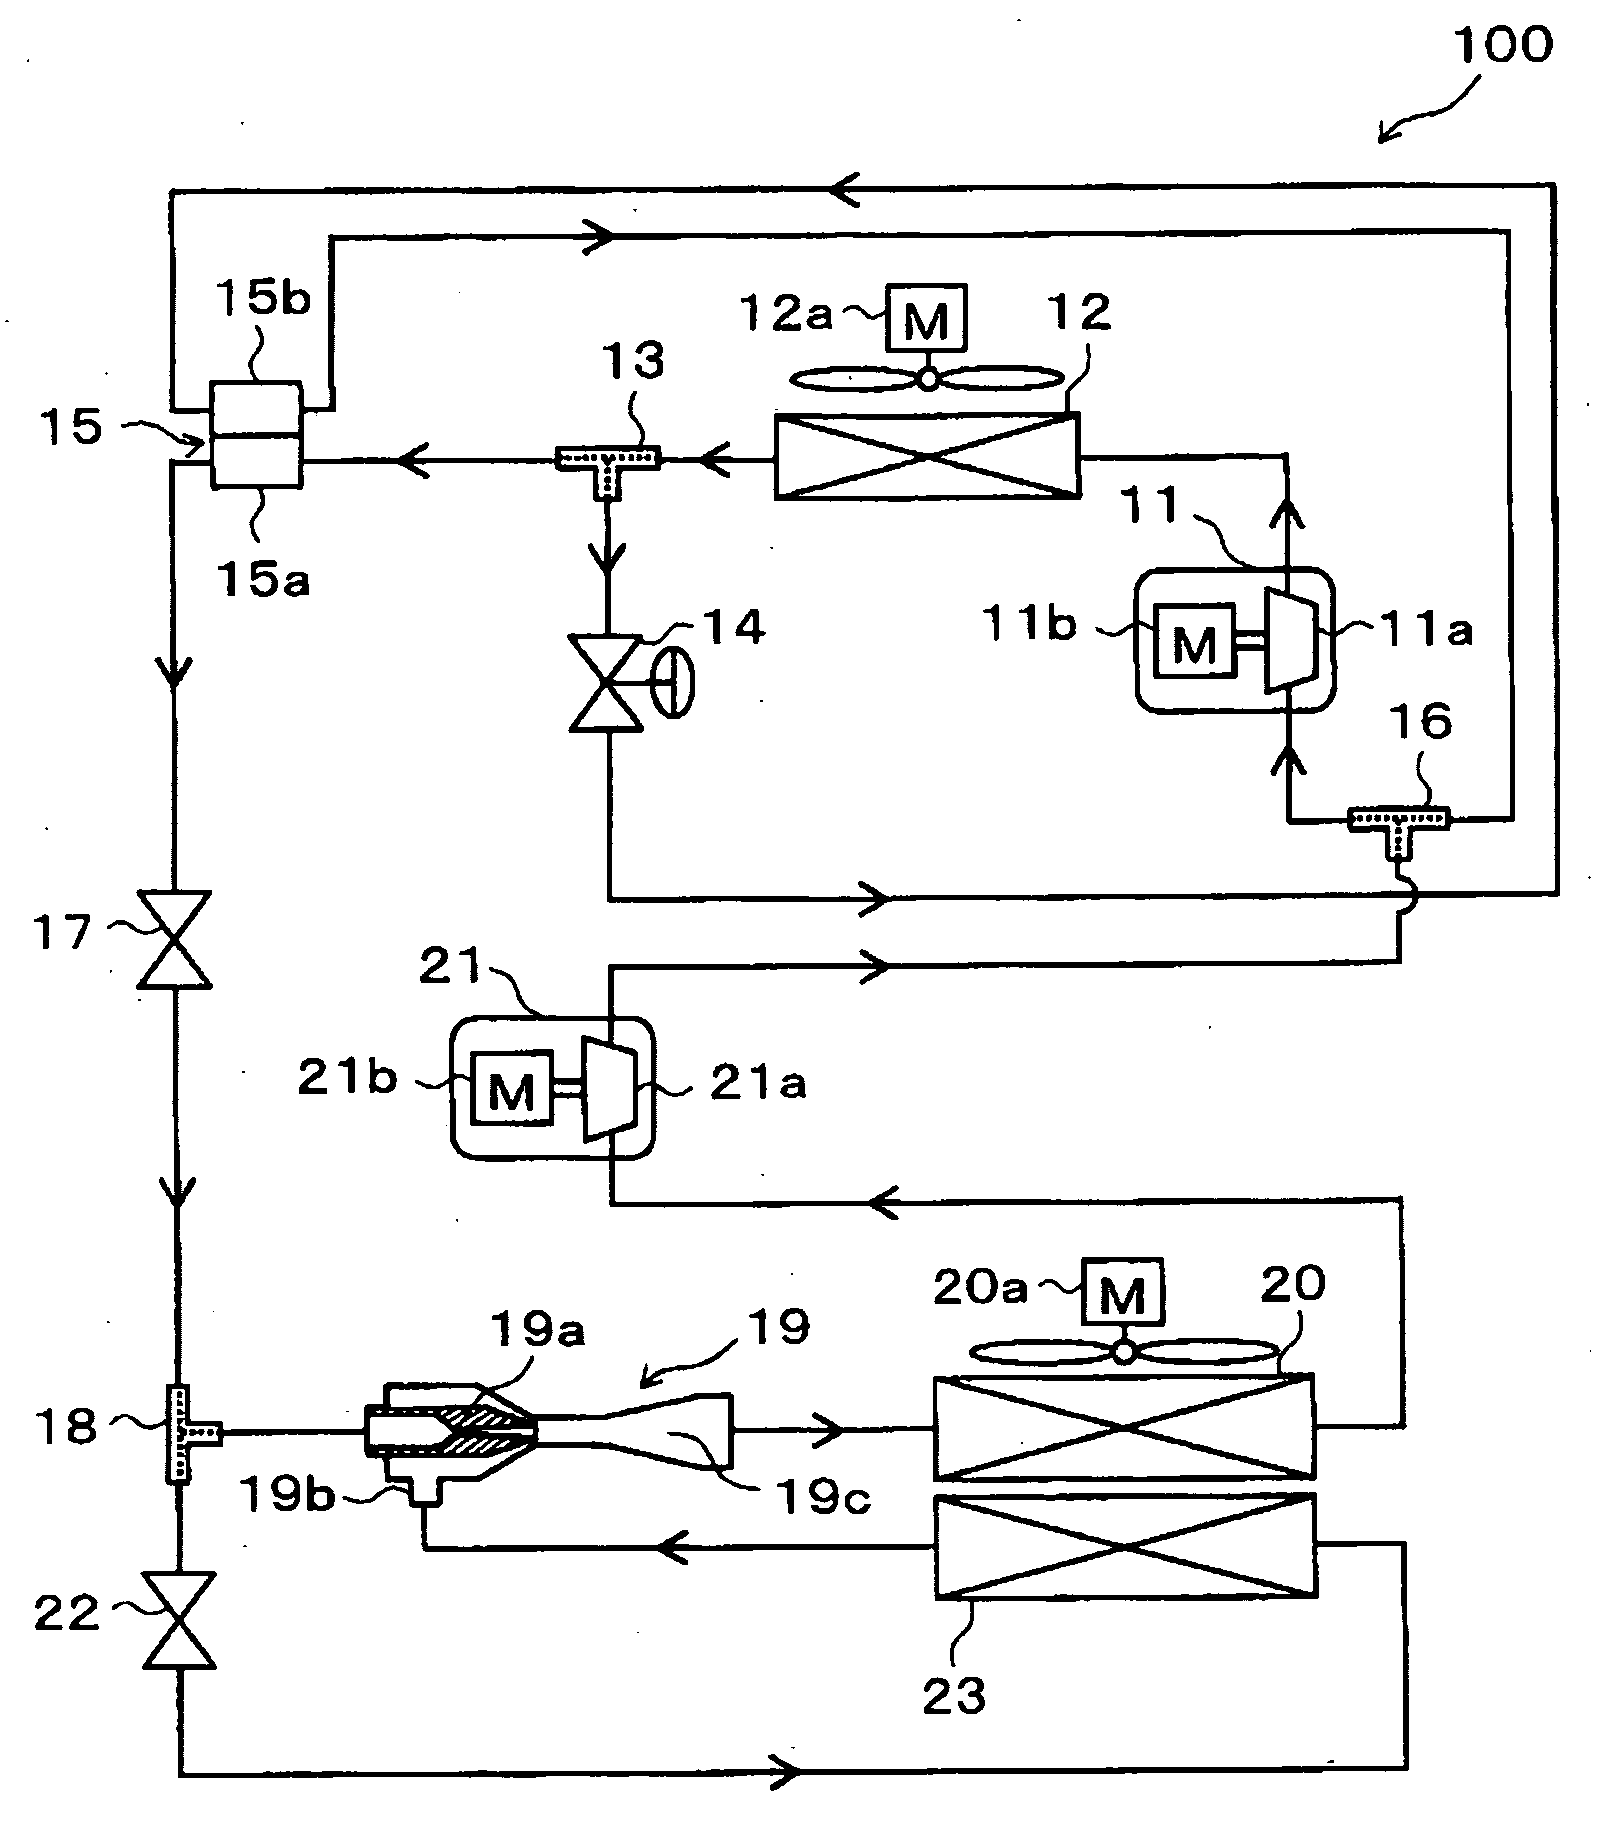 Ejector-type refrigerant cycle device